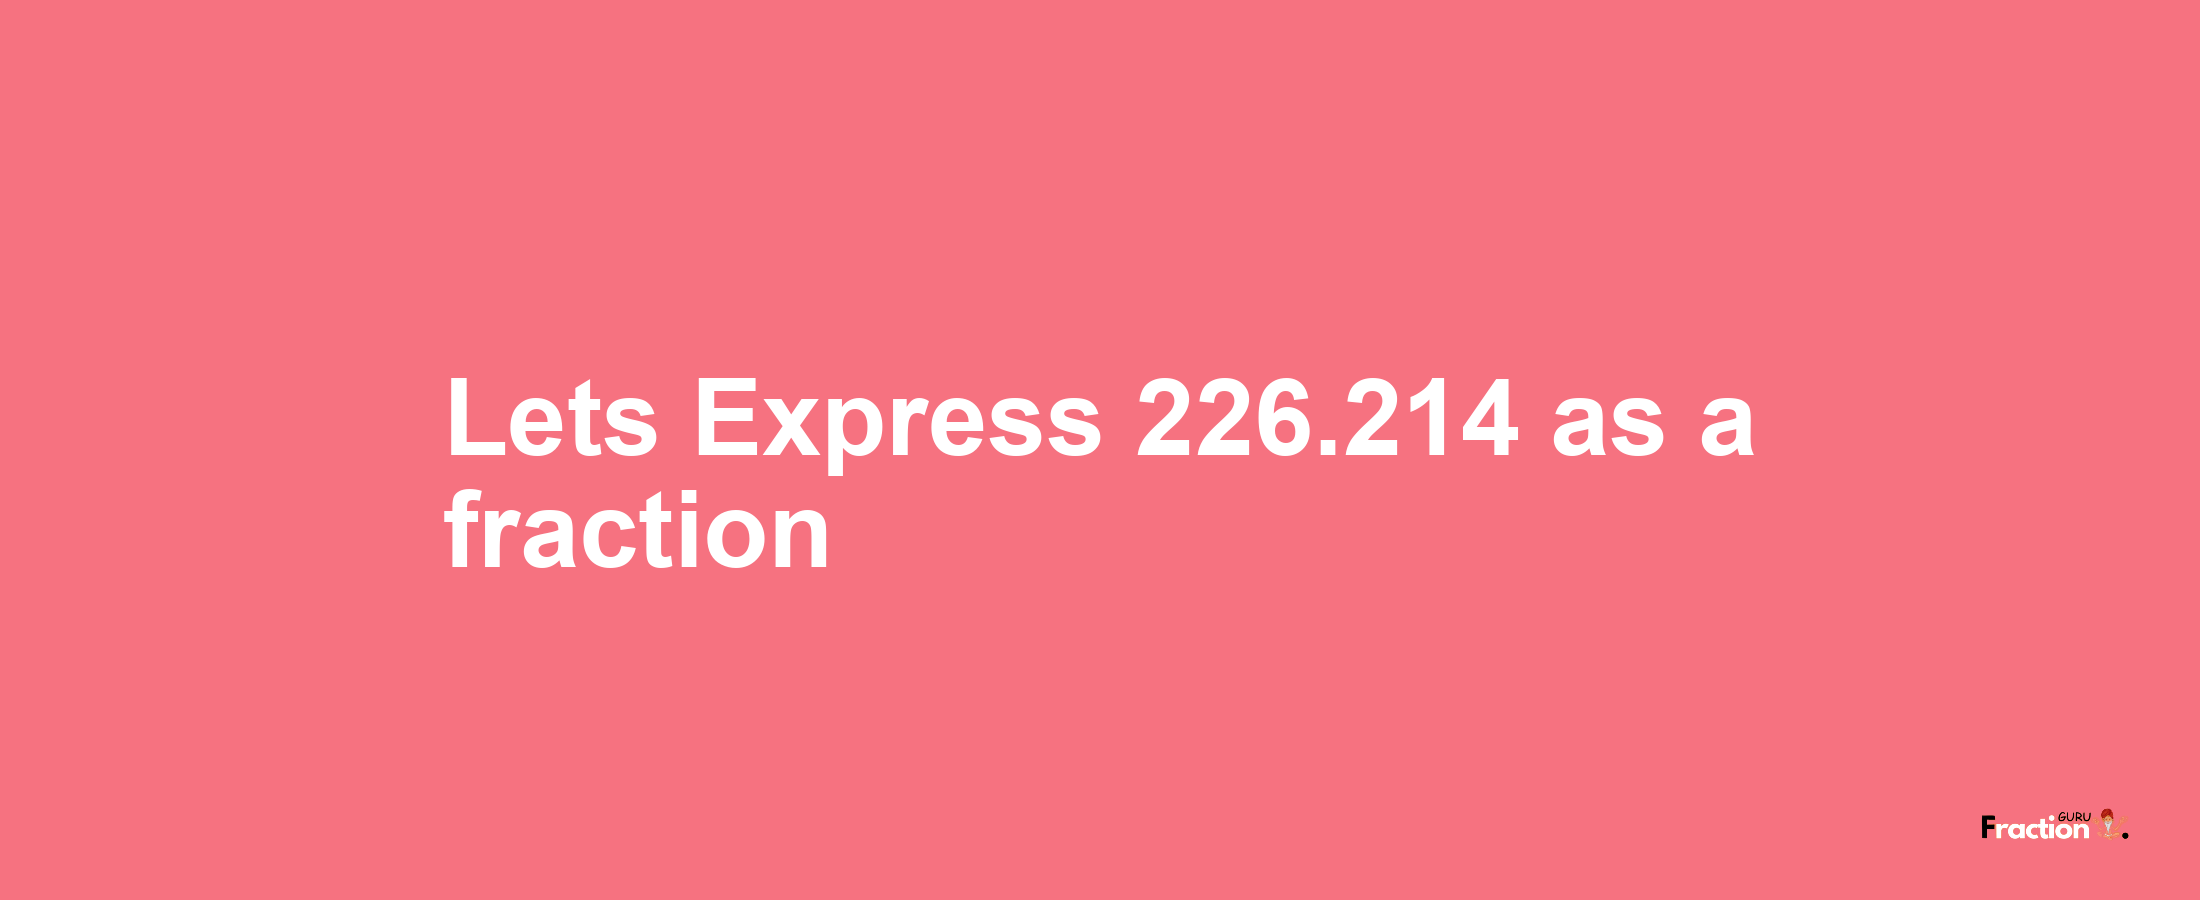 Lets Express 226.214 as afraction